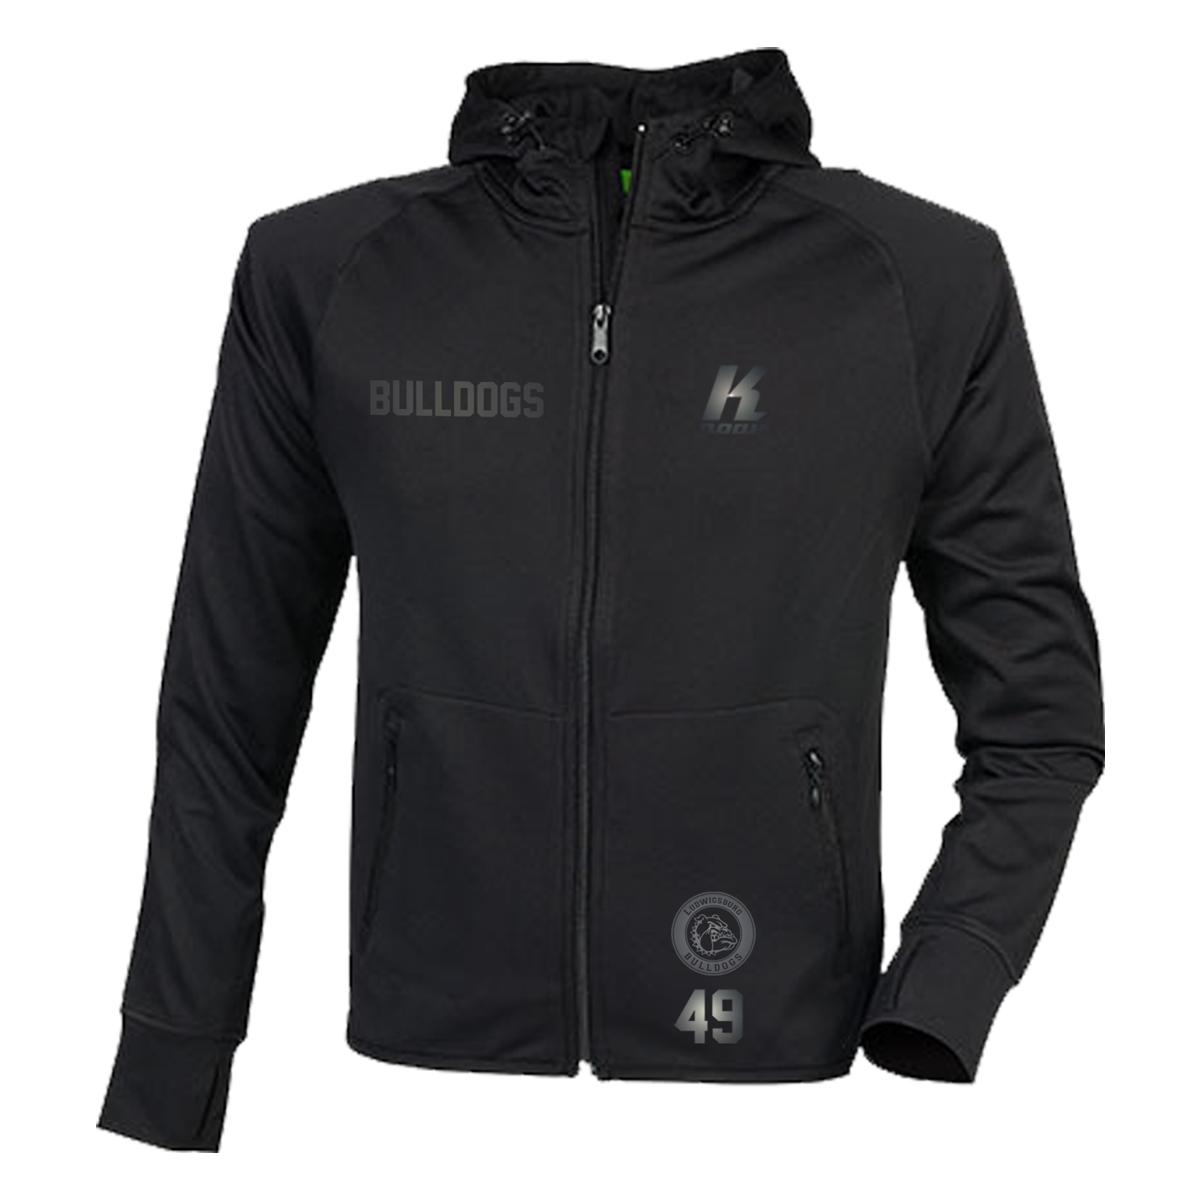 LB-Bulldogs "Blackline" Zip Hoodie TL550 with Playernumber or Initials